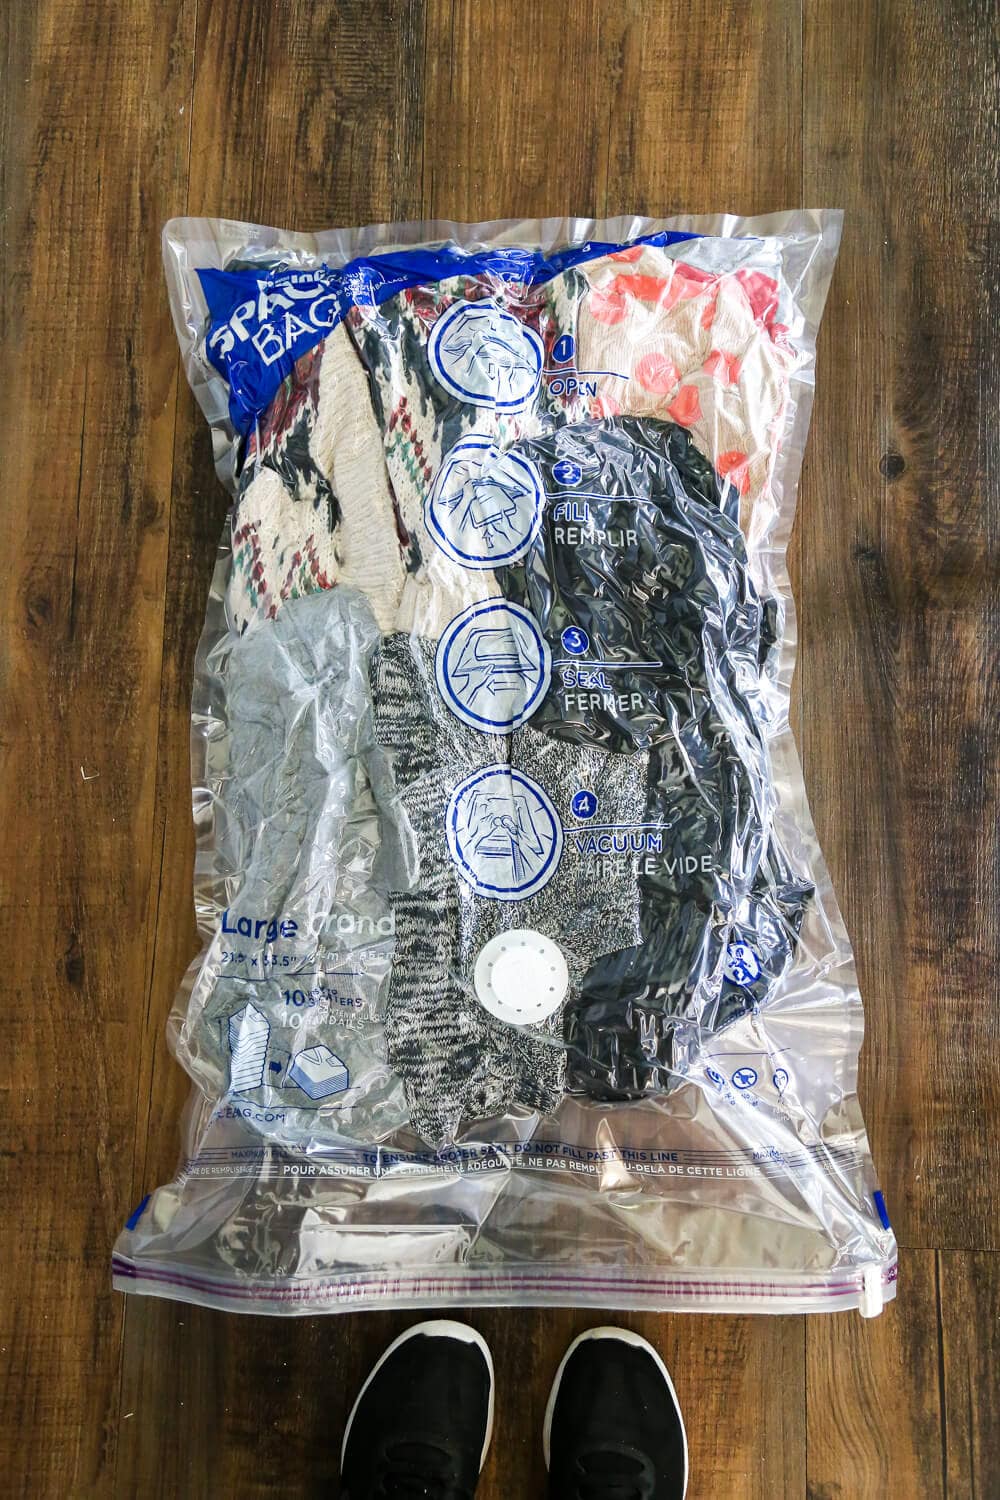 How to keep your linens and off-season clothing completely organized without wasting any space using Ziplock Space Bags! Great tips and ideas for getting your garage totally organized, too! 